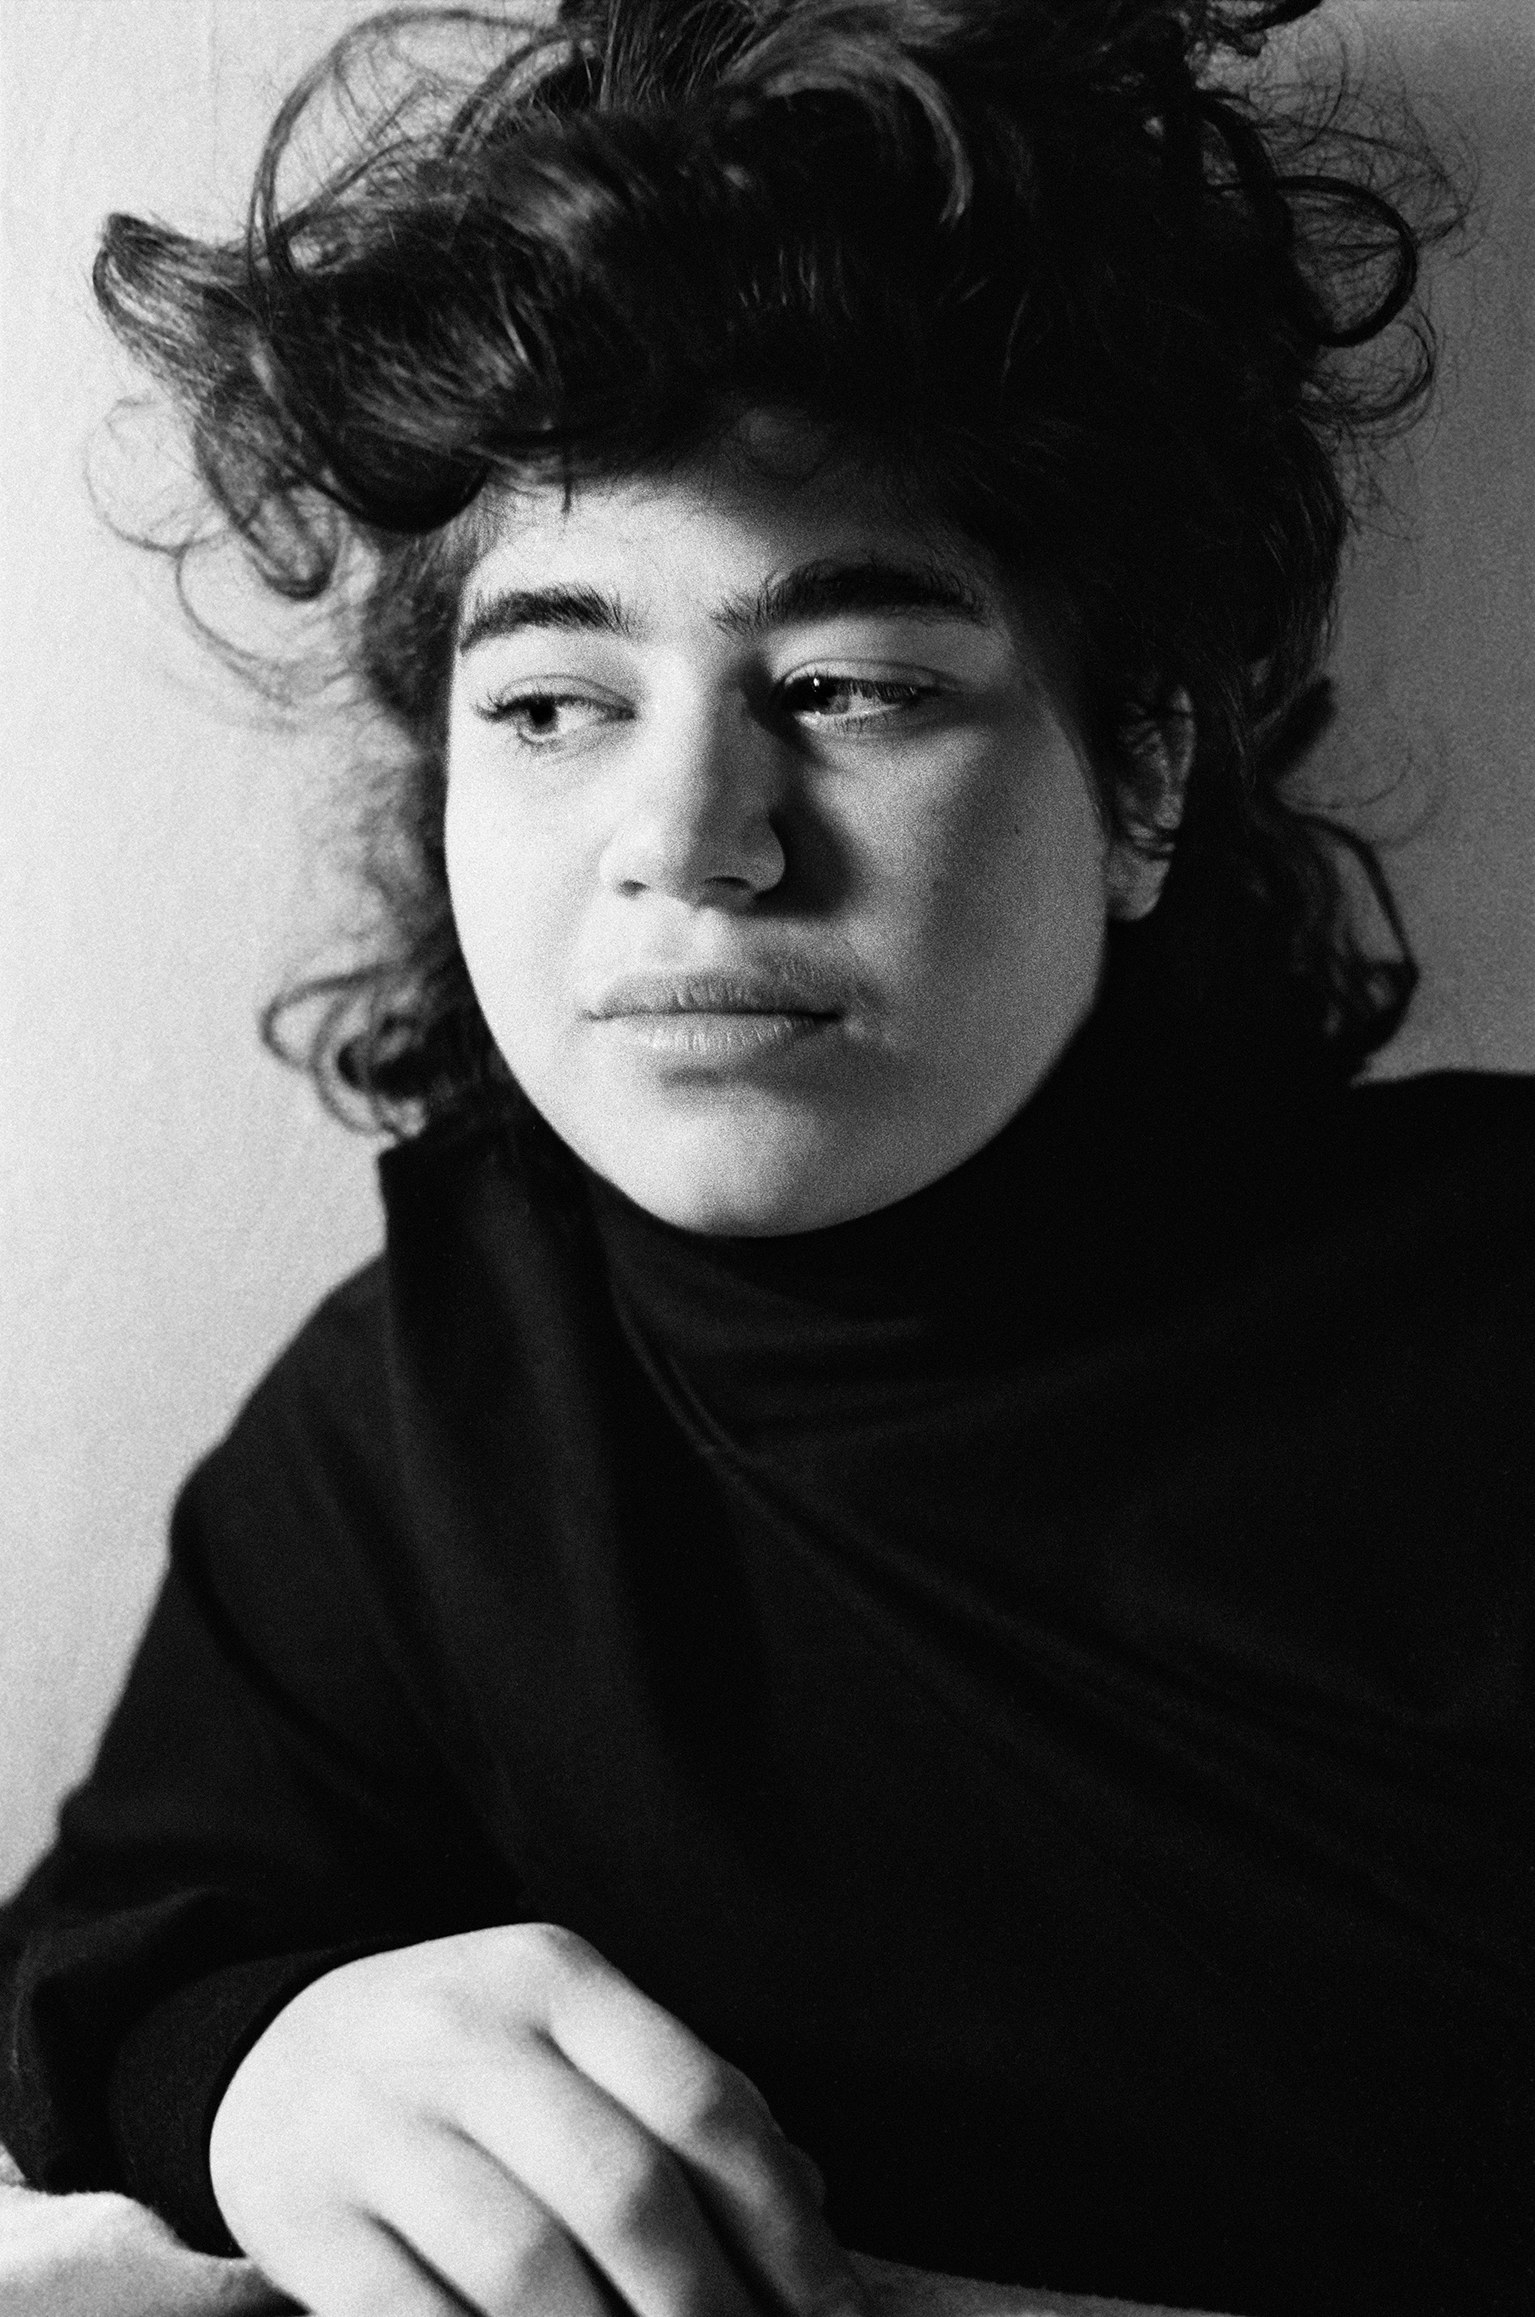 A young girl with curly hair named Molly wears a black turtleneck and looks off to the side of the camera 